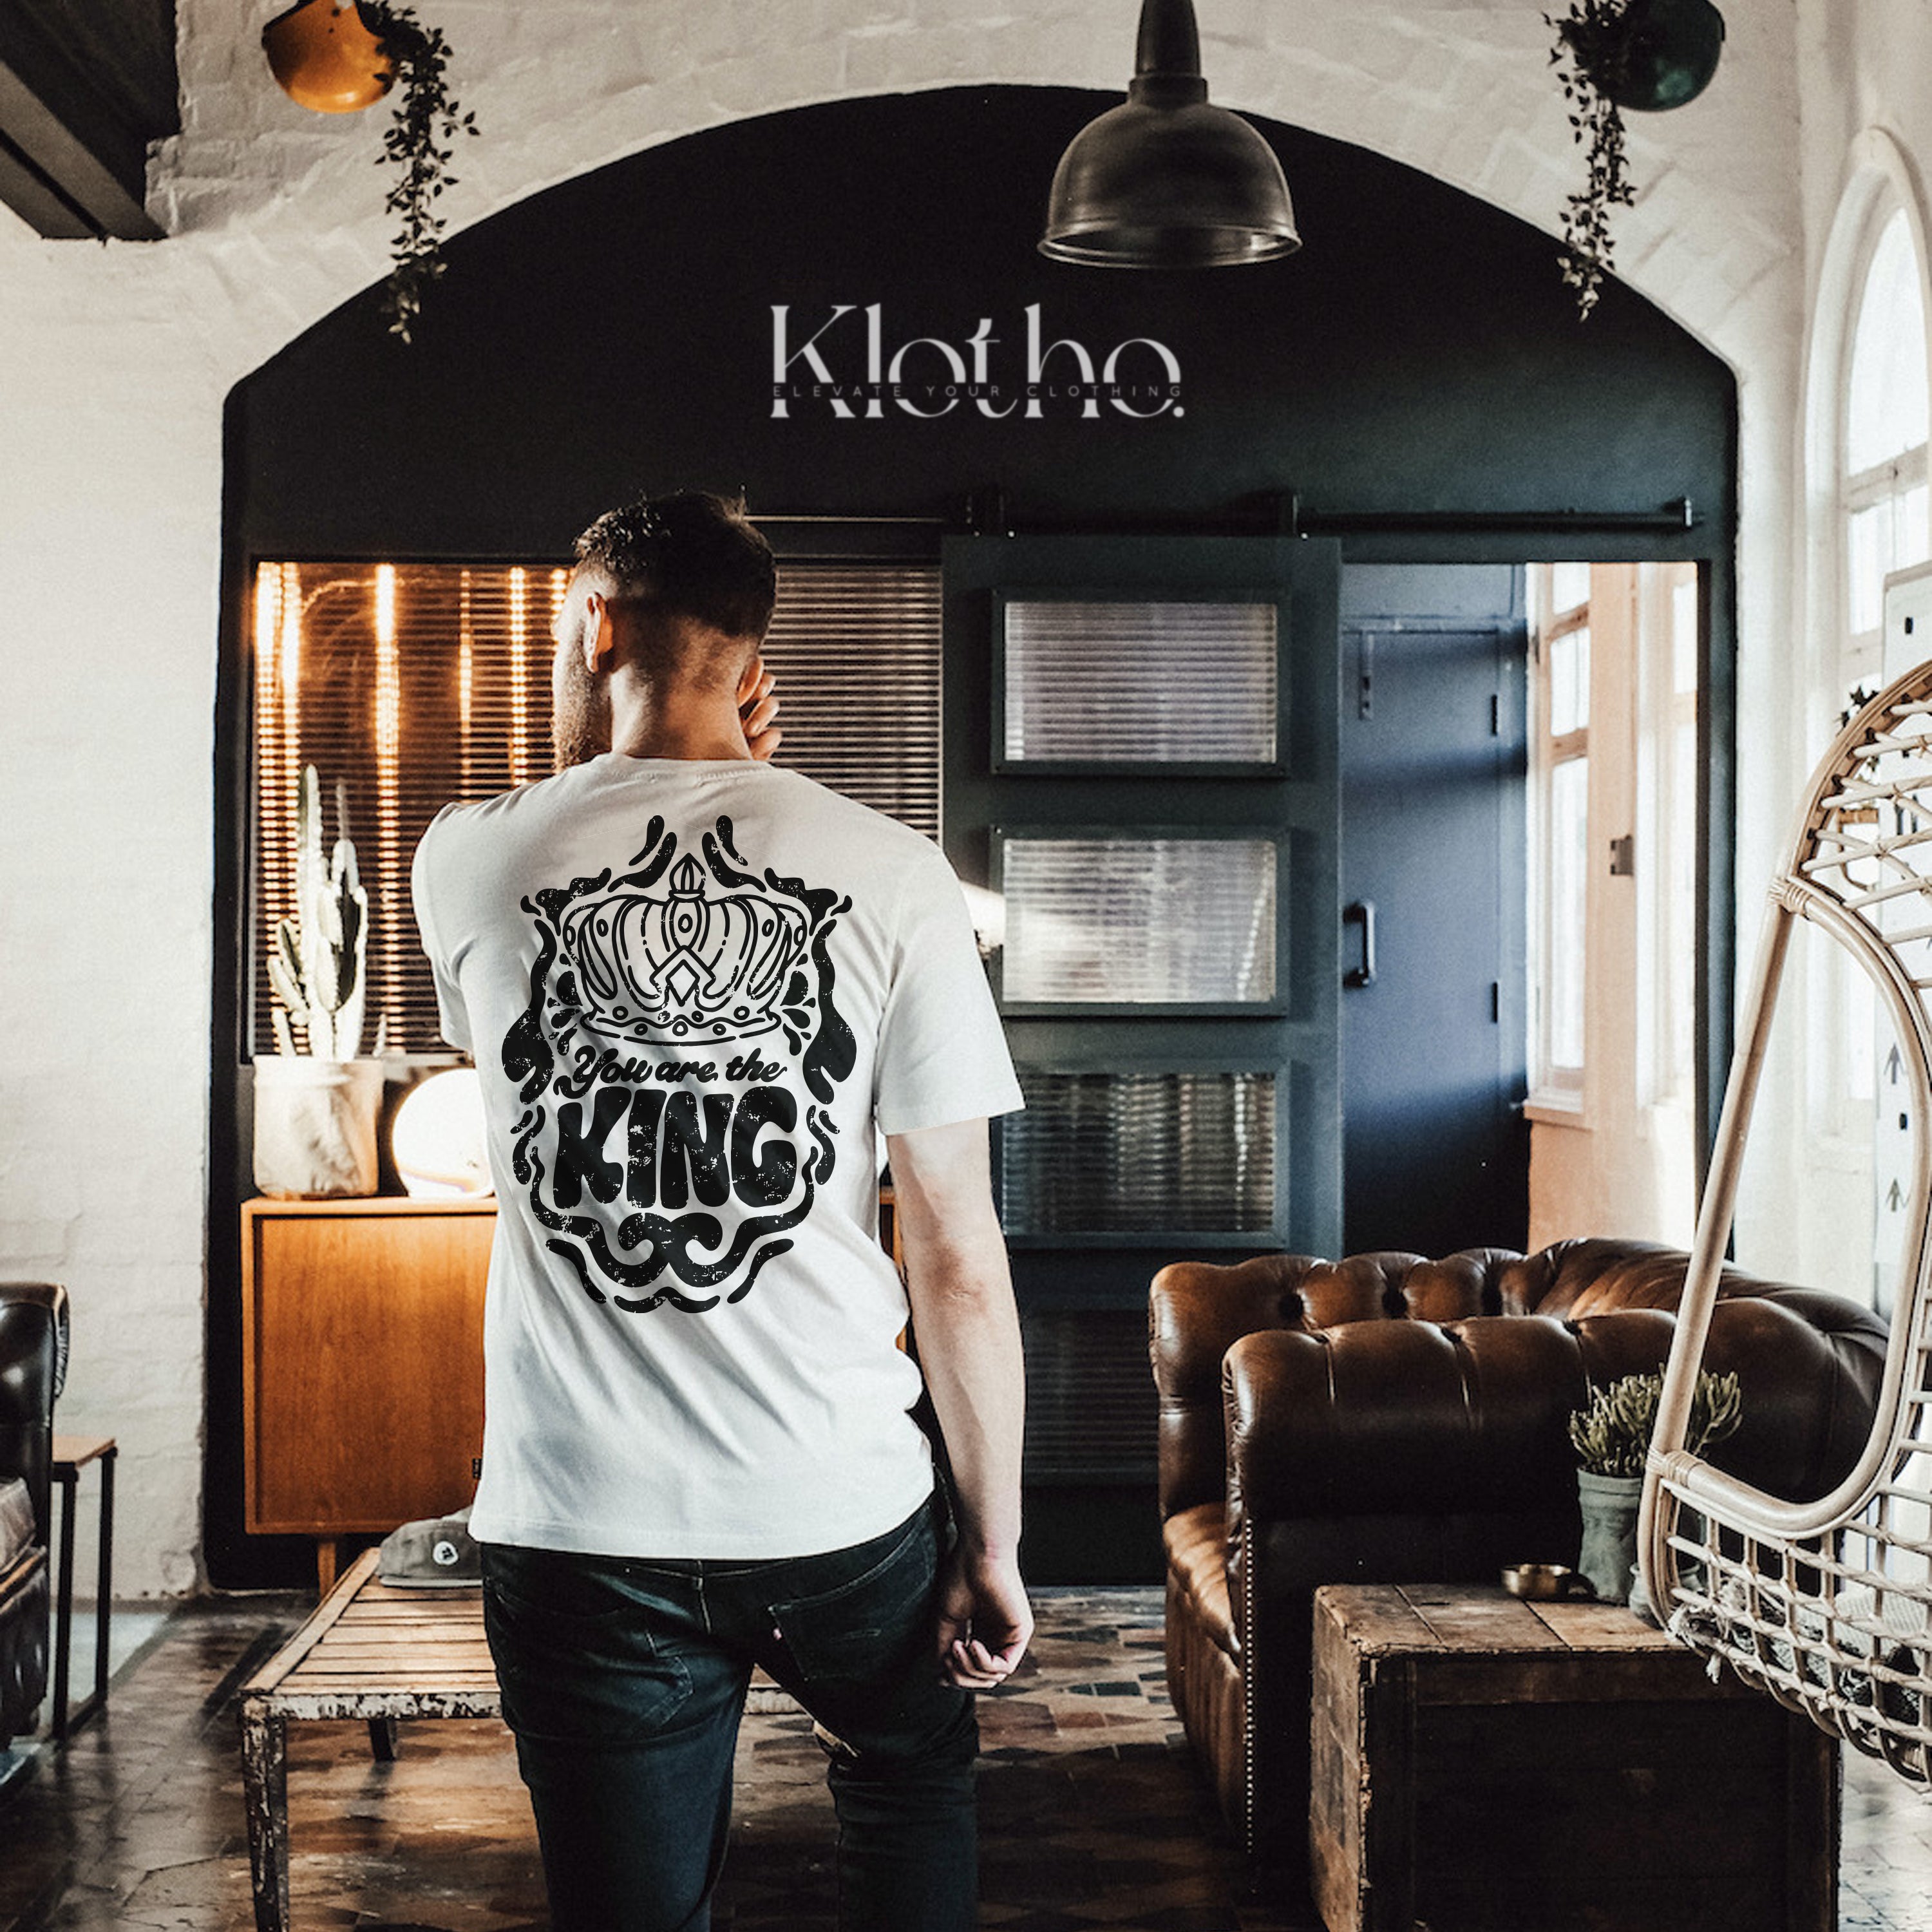 You are the King - Men's Graphic Tee